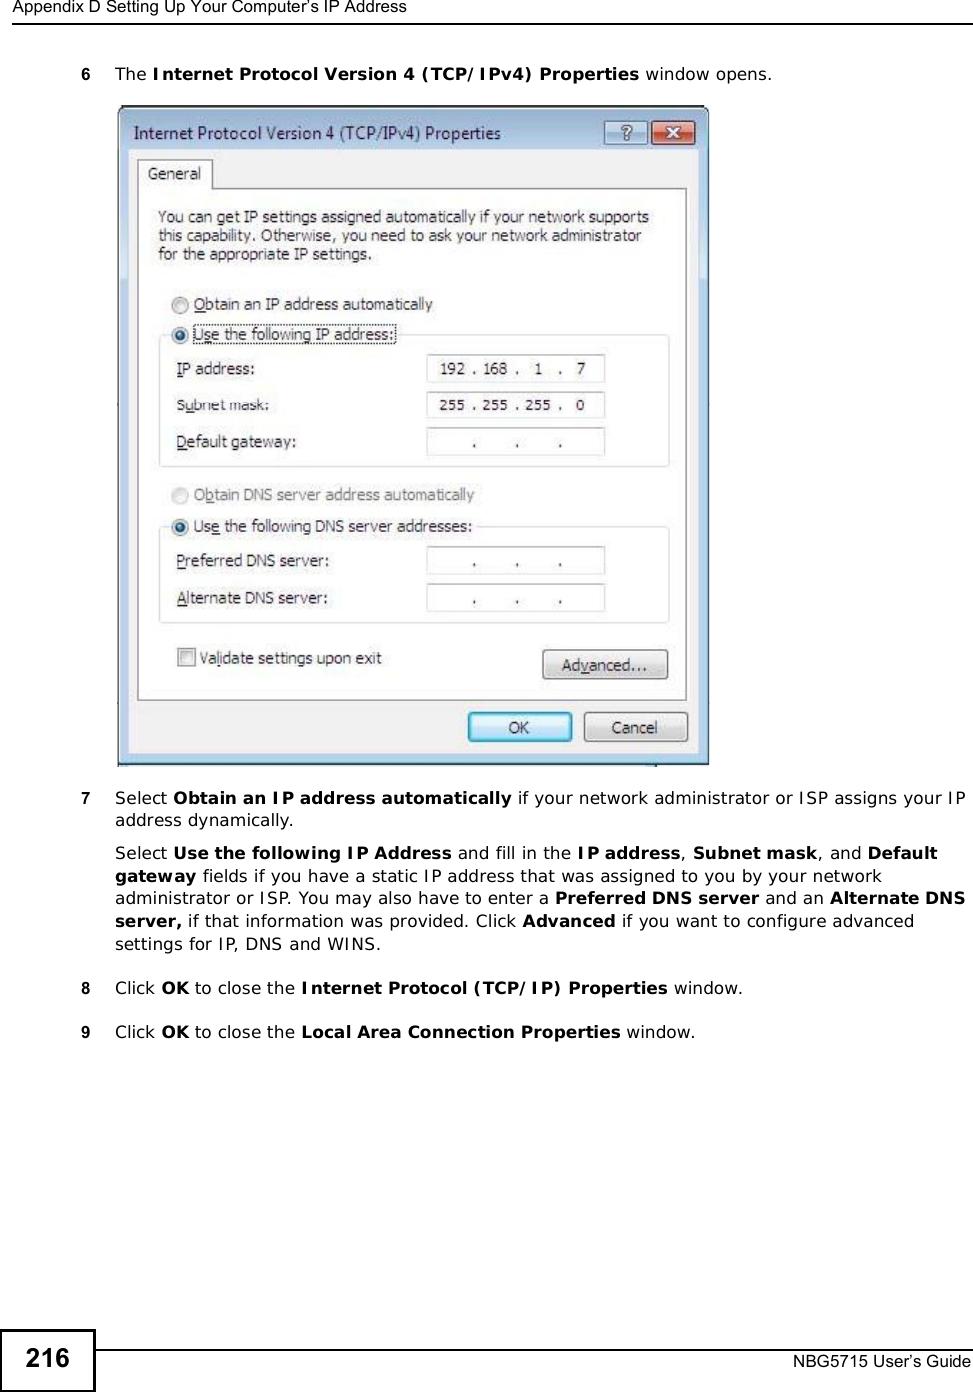 Appendix DSetting Up Your Computer’s IP AddressNBG5715 User’s Guide2166The Internet Protocol Version 4 (TCP/IPv4) Properties window opens.7Select Obtain an IP address automatically if your network administrator or ISP assigns your IP address dynamically.Select Use the following IP Address and fill in the IP address,Subnet mask, and Default gateway fields if you have a static IP address that was assigned to you by your network administrator or ISP. You may also have to enter a Preferred DNS server and an AlternateDNSserver, if that information was provided. Click Advanced if you want to configure advanced settings for IP, DNS and WINS. 8Click OK to close the Internet Protocol (TCP/IP) Properties window.9Click OK to close the Local Area Connection Properties window.